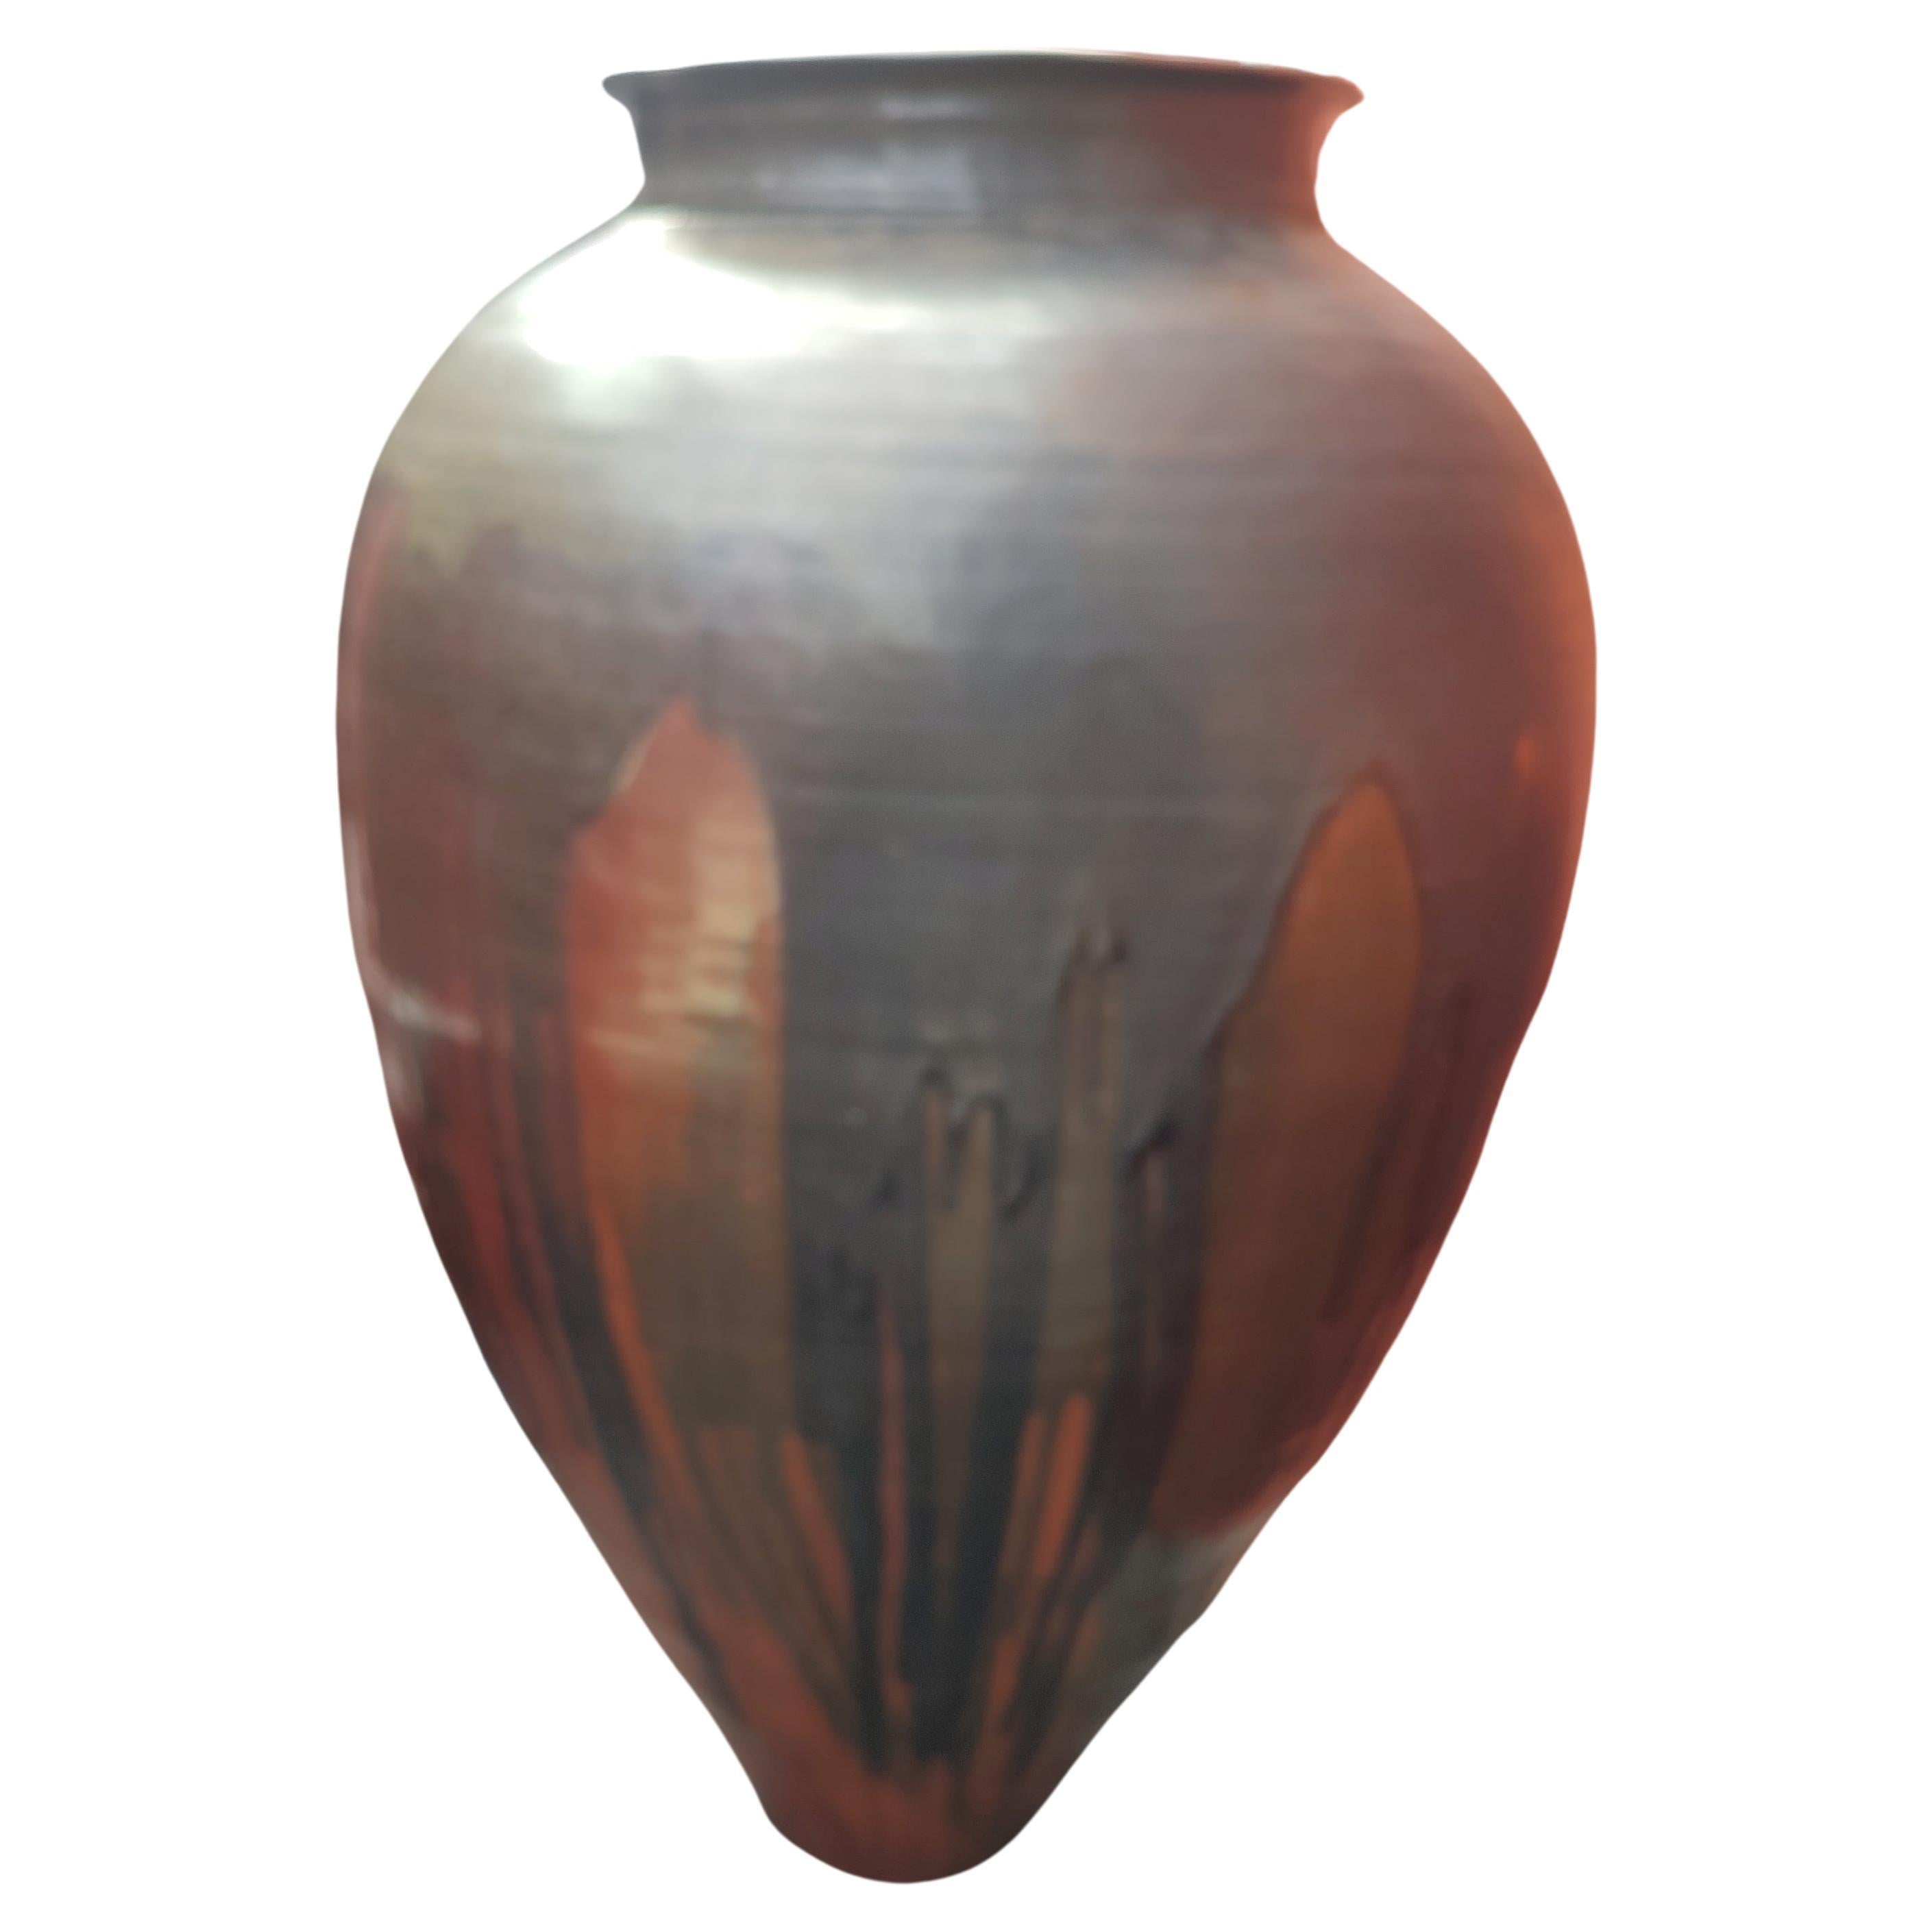 Fabulous and massive vase - urn which will be a eye catcher in your living or business space. Almost 4 ft tall and 30 inch at its widest in the center down to about 7 inch at the base. Fantastic orange and brown drip glaze with some other colors